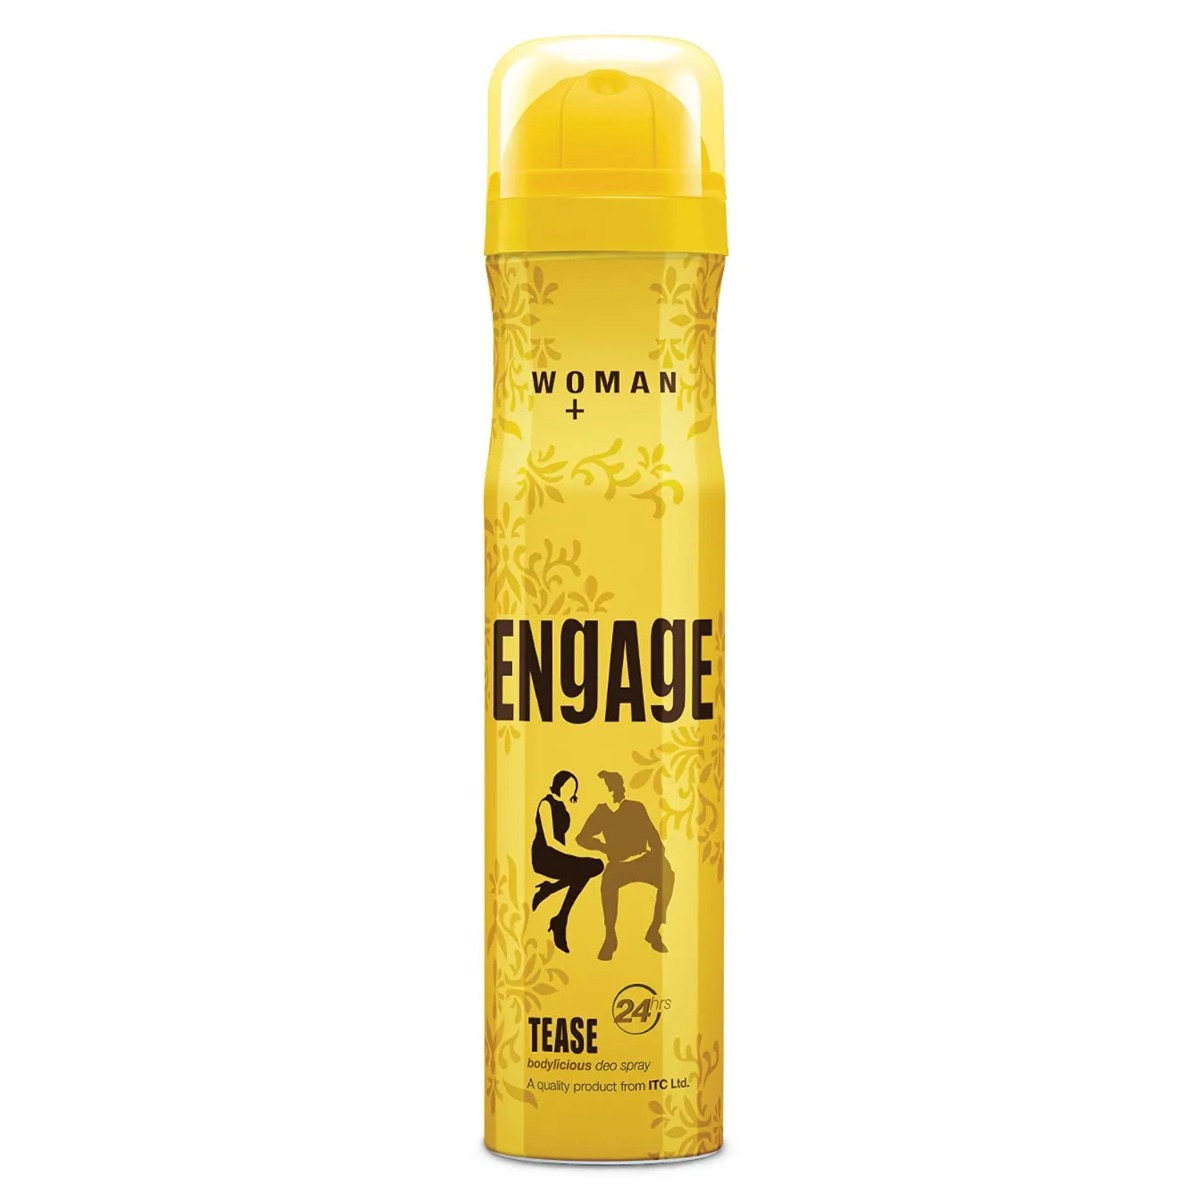 Engage Tease Deodorant For Women, Citrus and Floral, Skin Friendly, 150ml